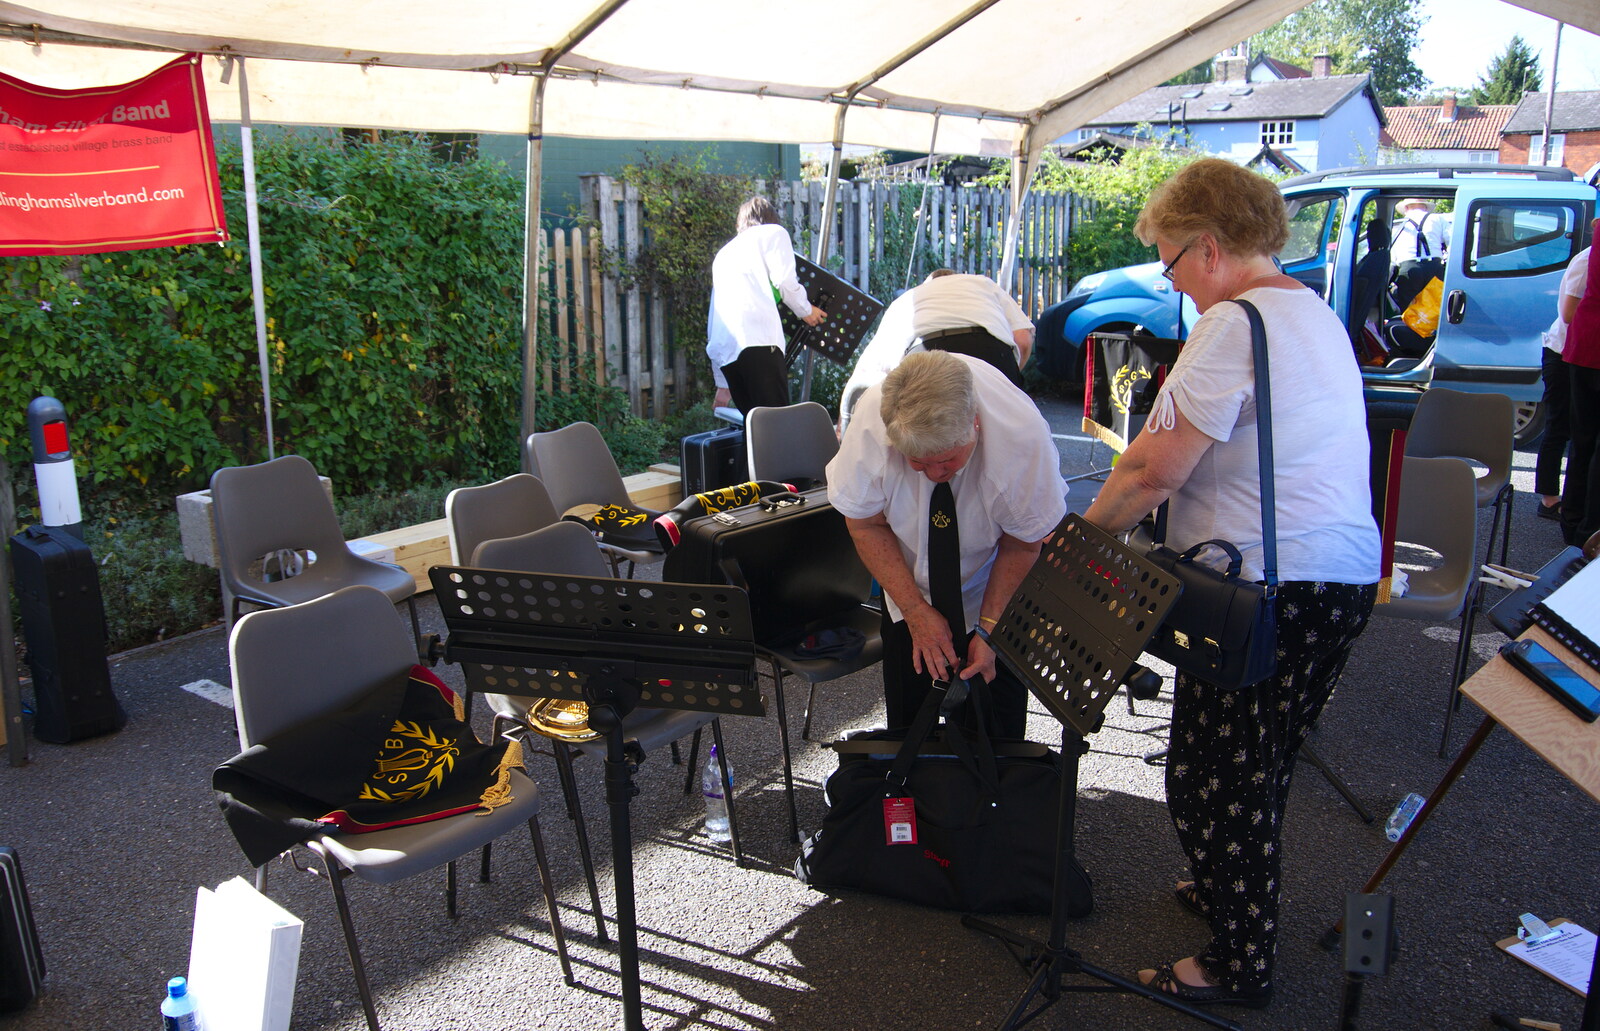 The band packs up after the gig in a carpark from The Gislingham Silver Band at Walsham Le Willows, Suffolk - 26th August 2019